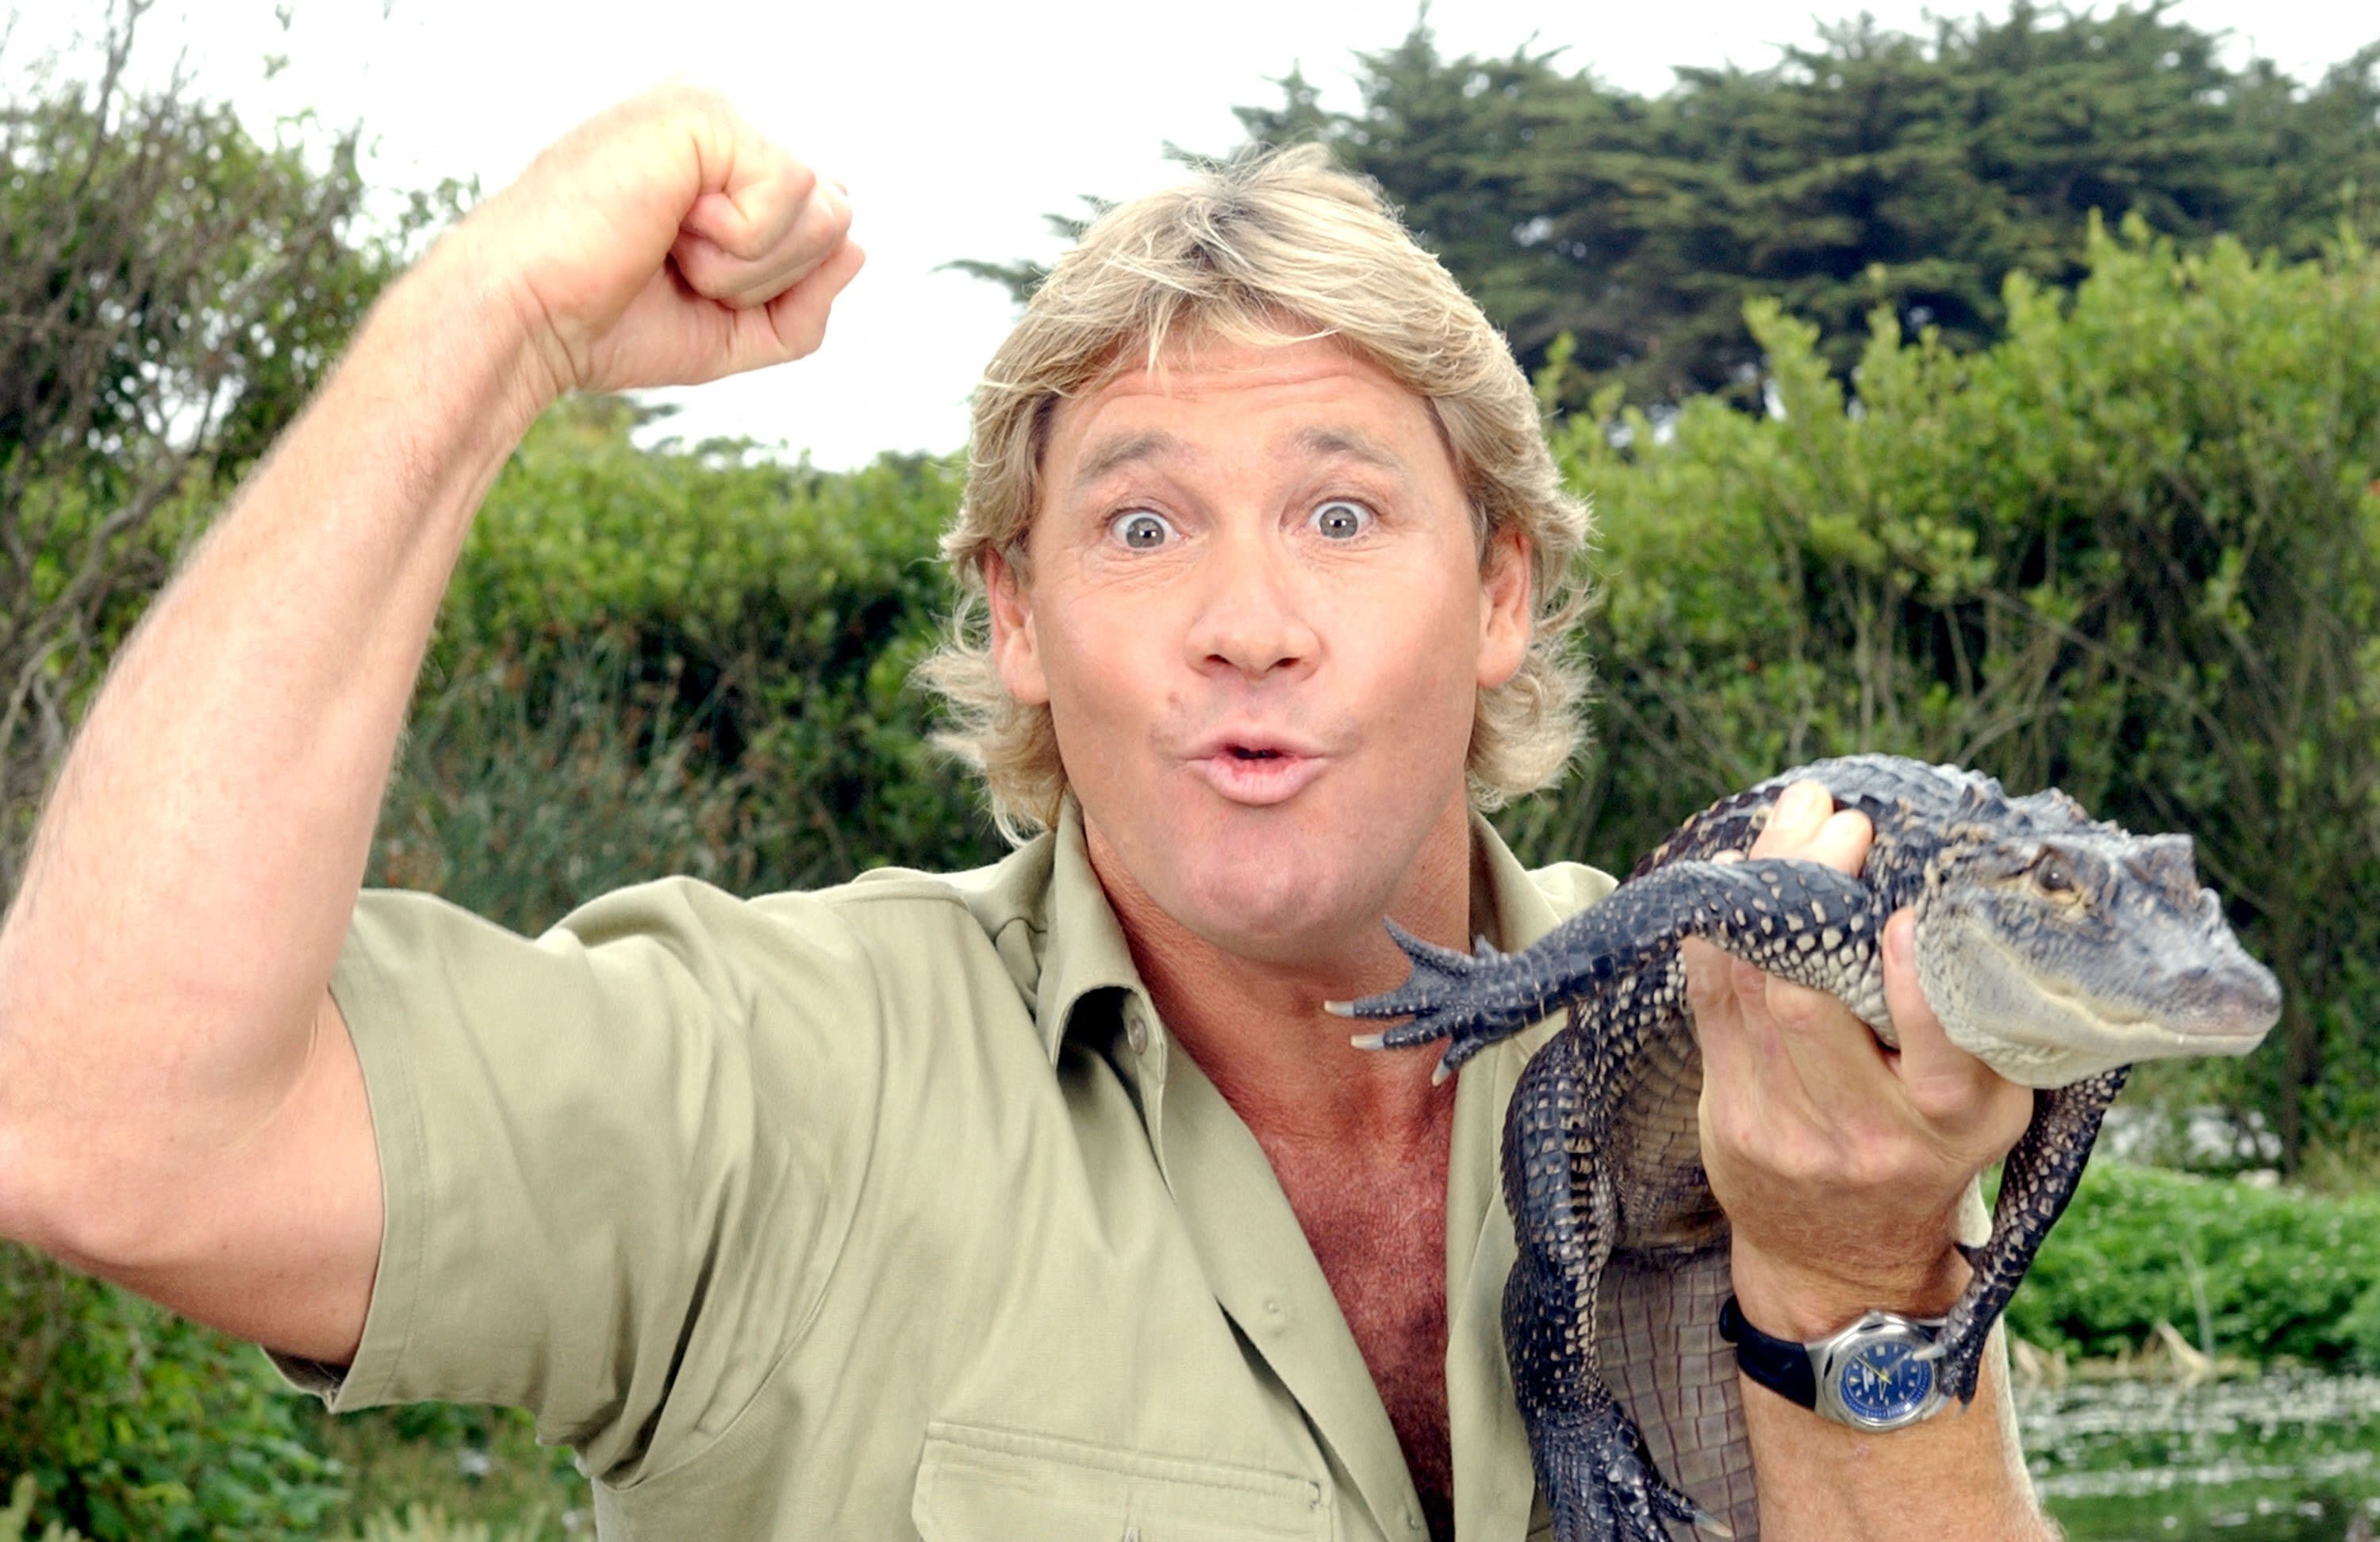 The author said that among other things, wildlife conservationist Steve Irwin helped her develop empathy and understanding towards others.